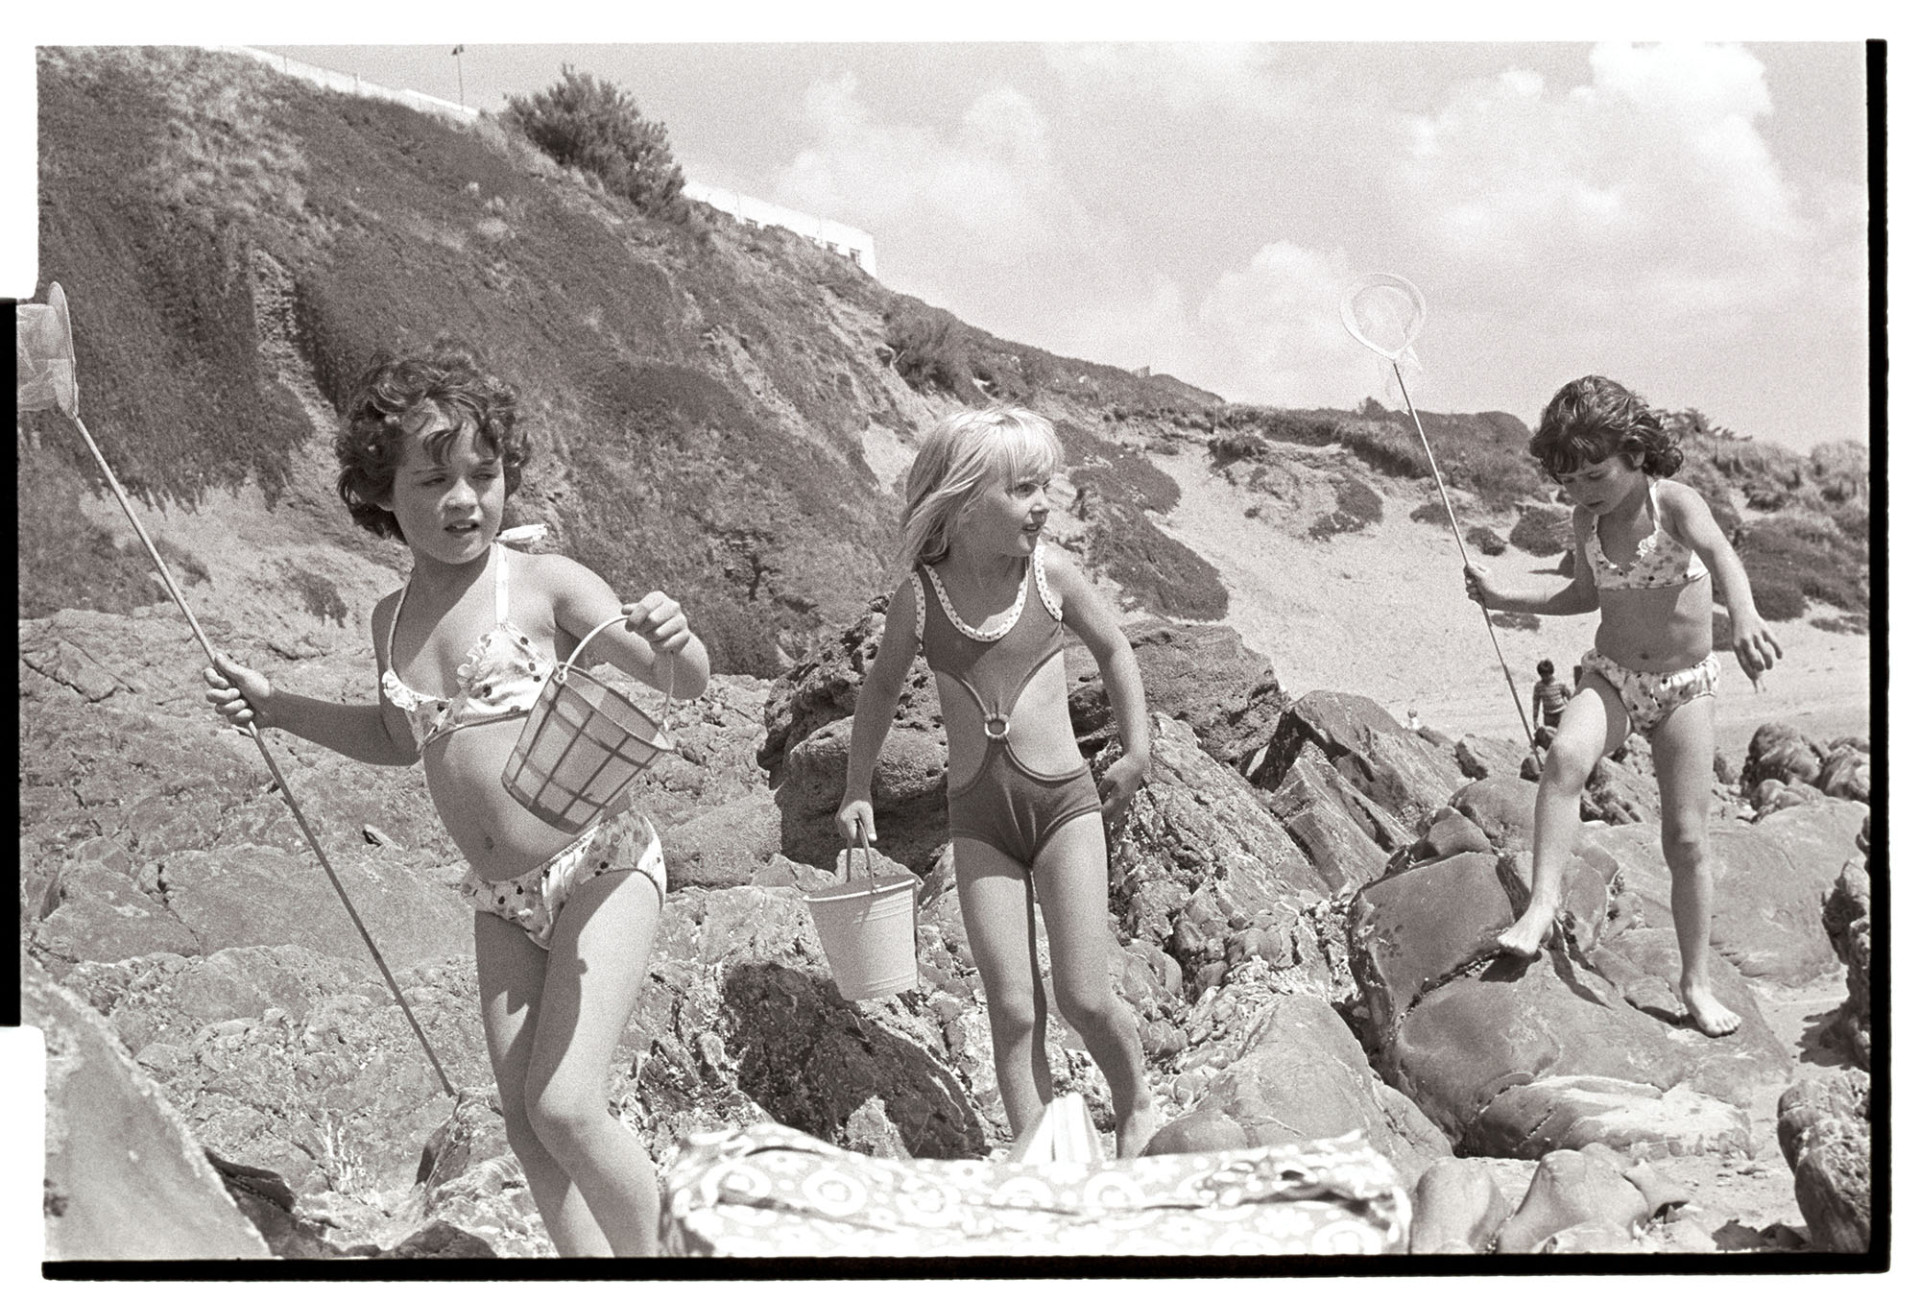 Three children on beach.
[Three young girls with fishing nets and buckets, playing on rocks on the beach, possibly at Instow Sands.]